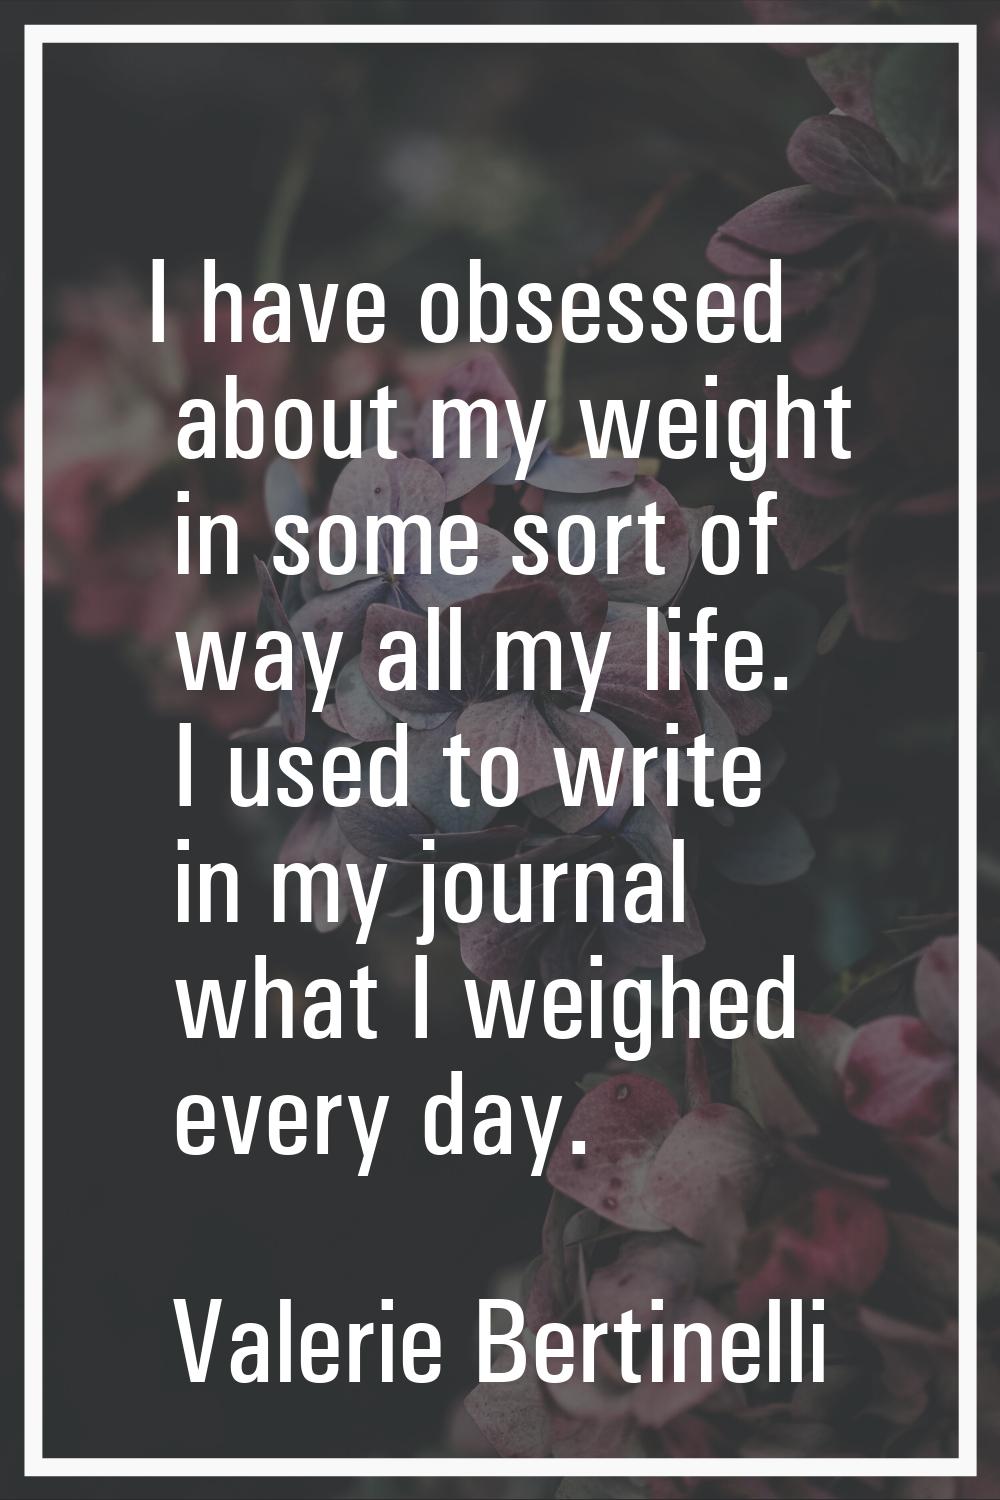 I have obsessed about my weight in some sort of way all my life. I used to write in my journal what